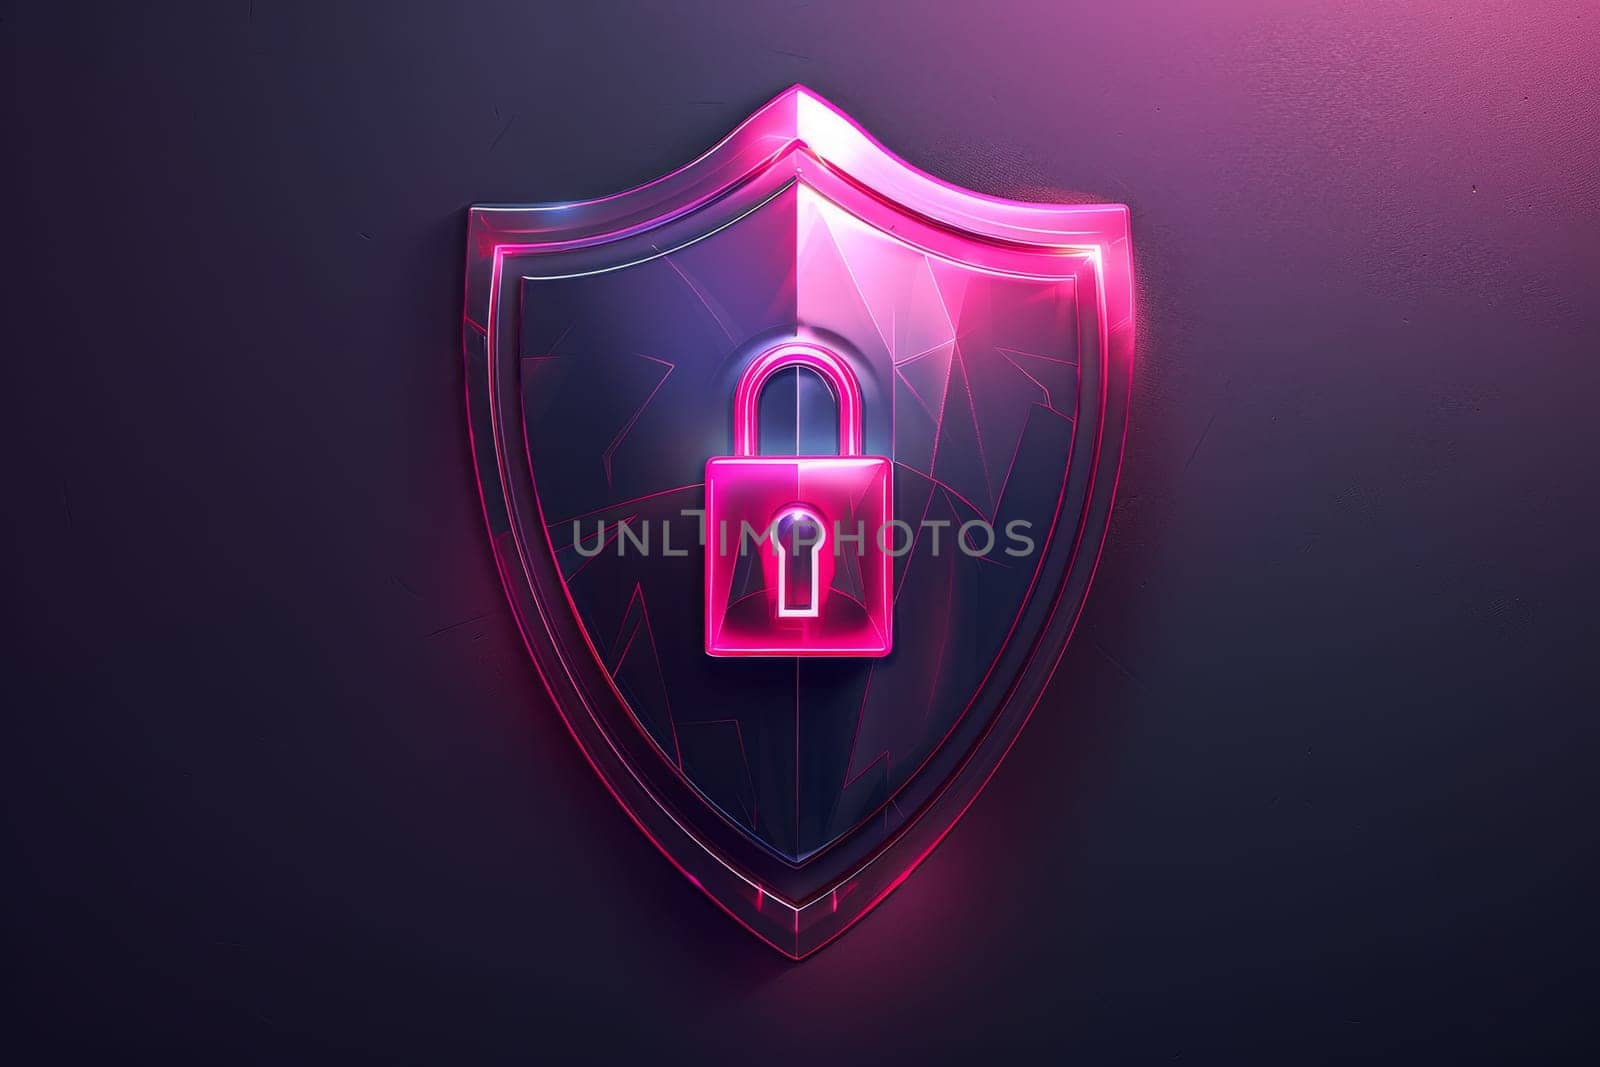 A pink shield with a keyhole in the middle. The shield is a symbol of protection and security